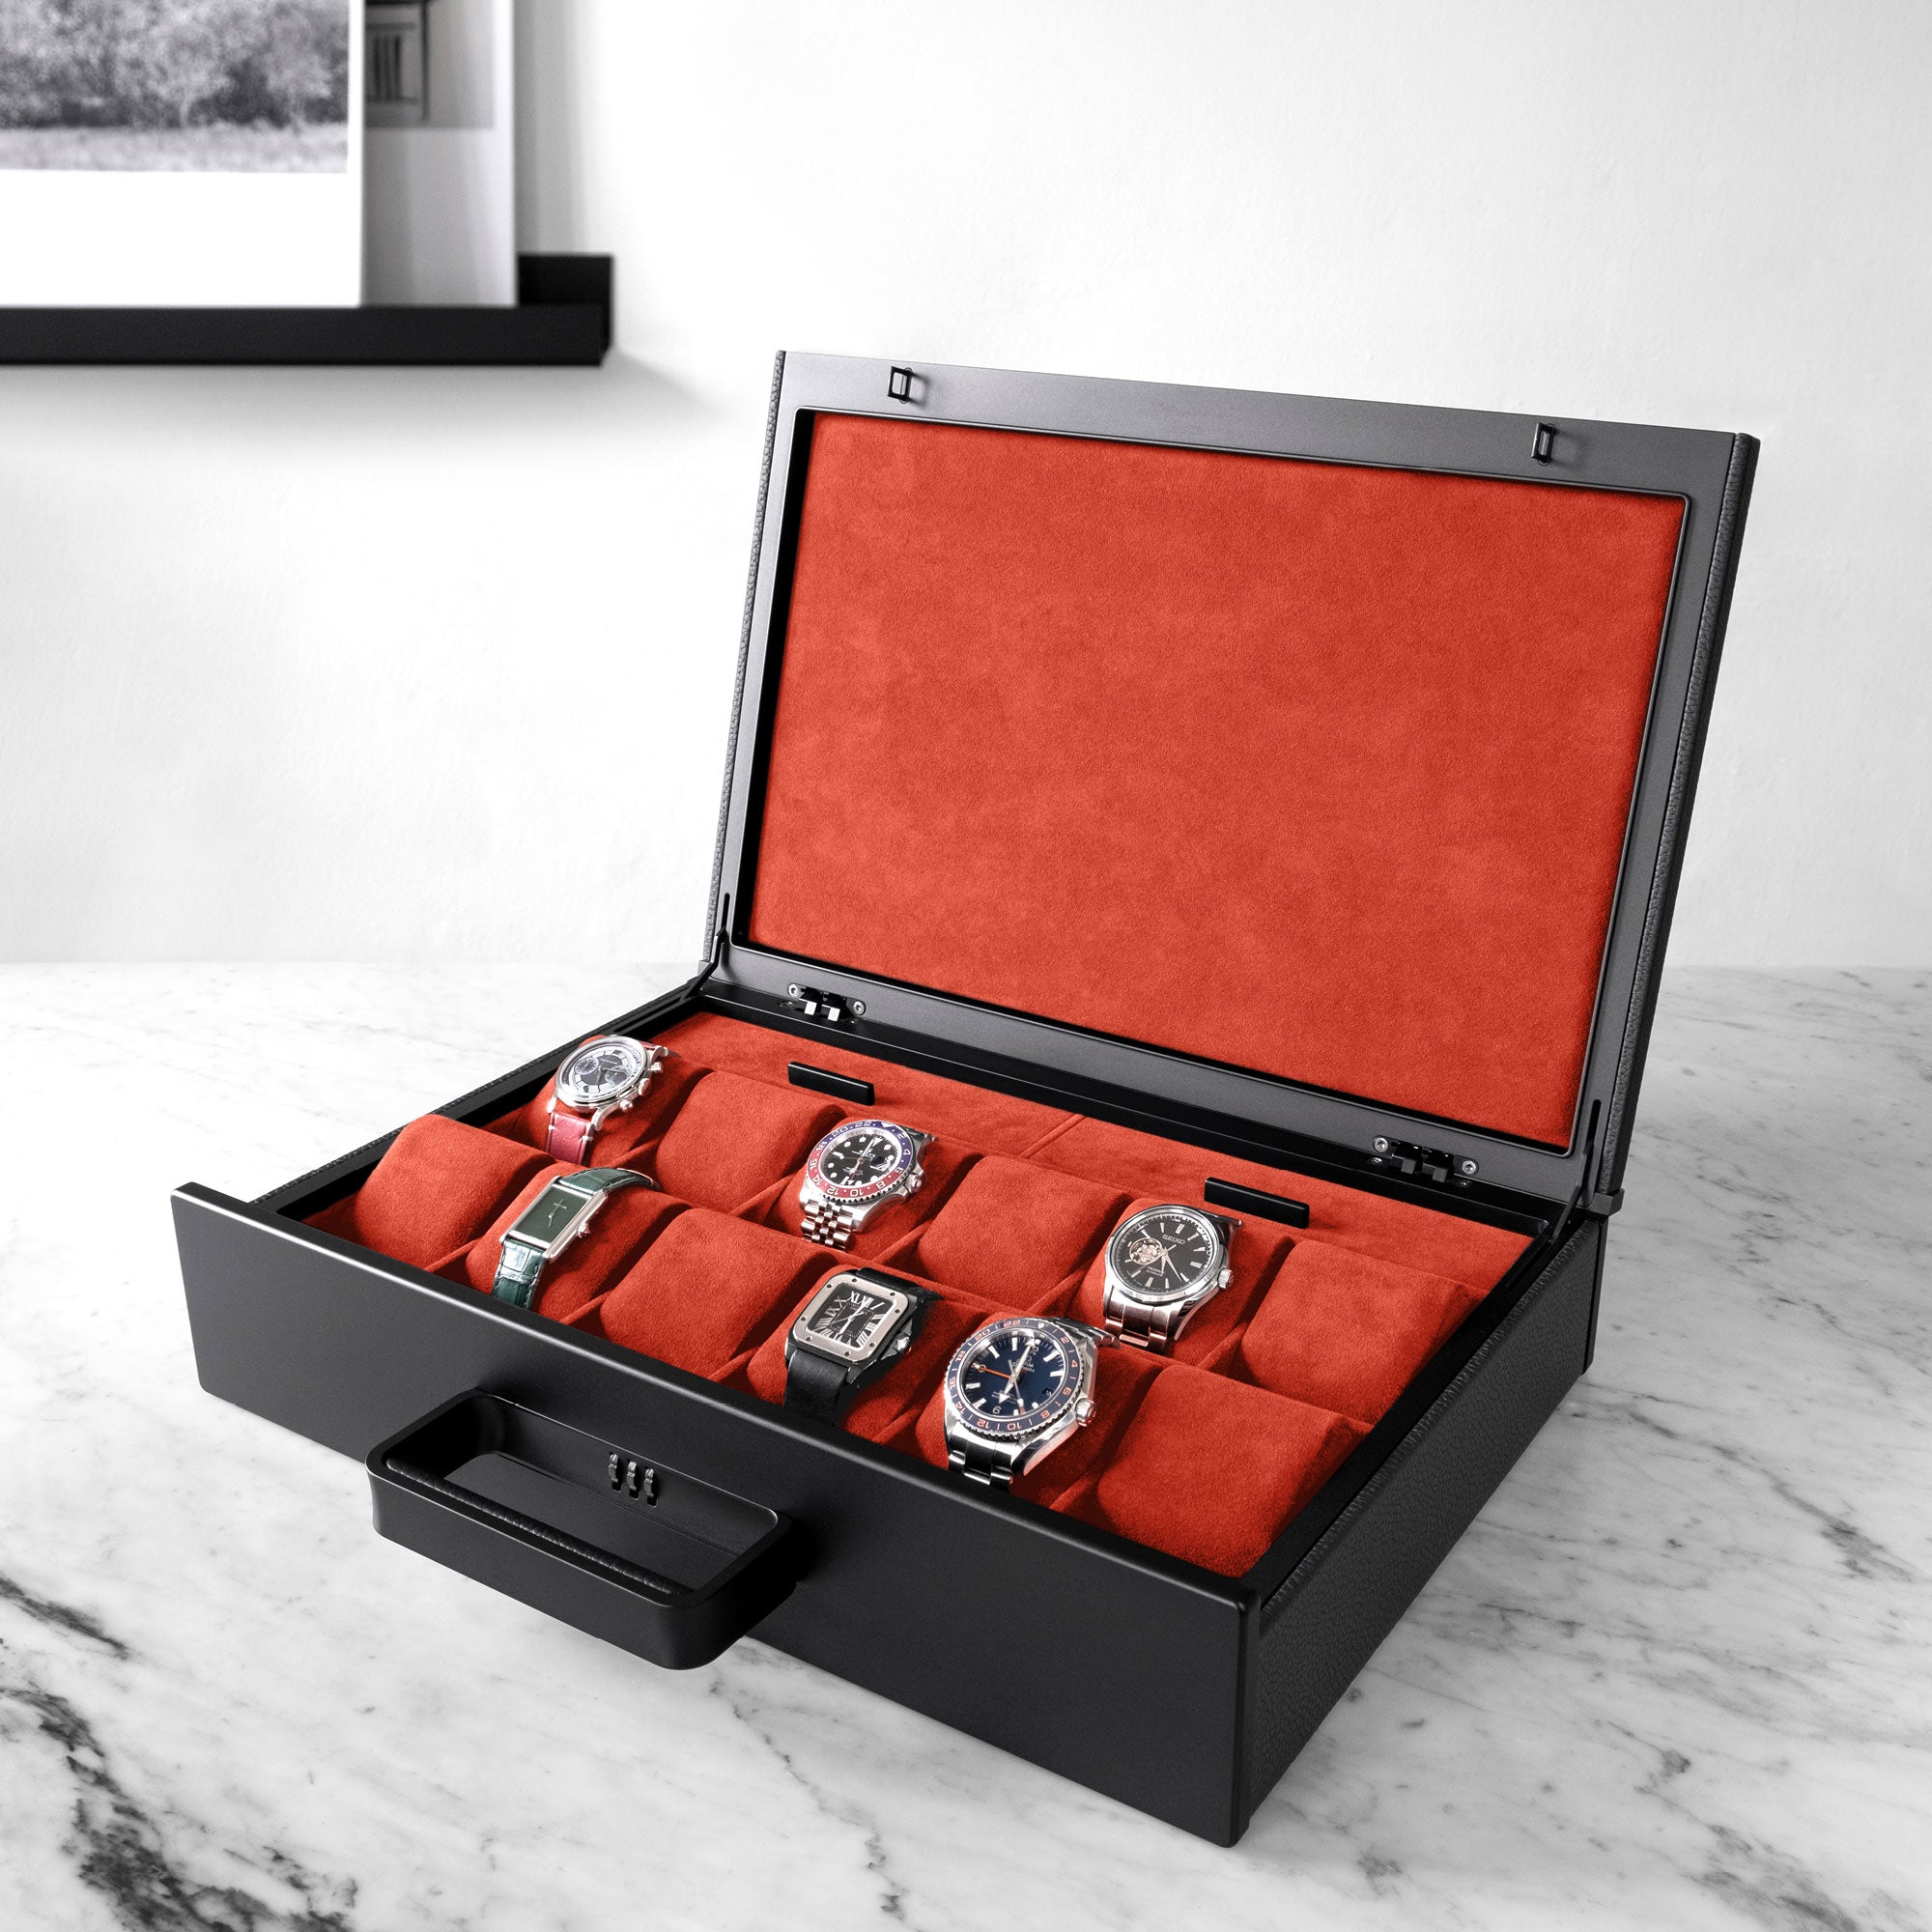 Lifestyle shot of open Mackenzie 12 Watch briefcase in carbon fiber and black aluminum casing, black leather and soft vermilion Alcantara made by hand filled with luxury watches including Rolex, Cartier and Omega